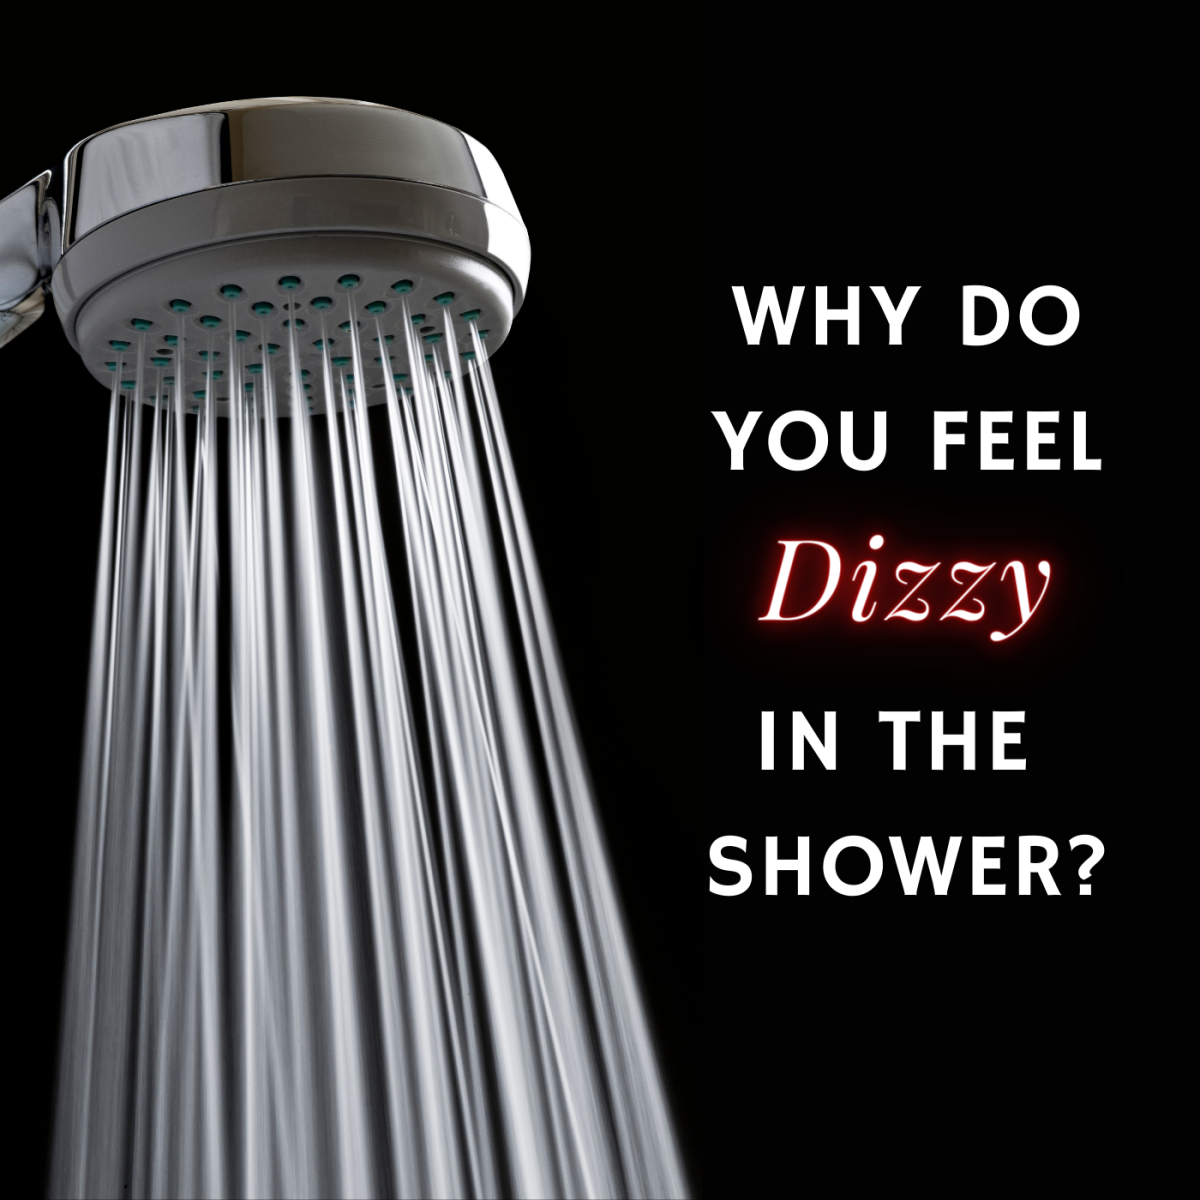 Why do you get dizzy and light-headed in the shower? Let's take a look.